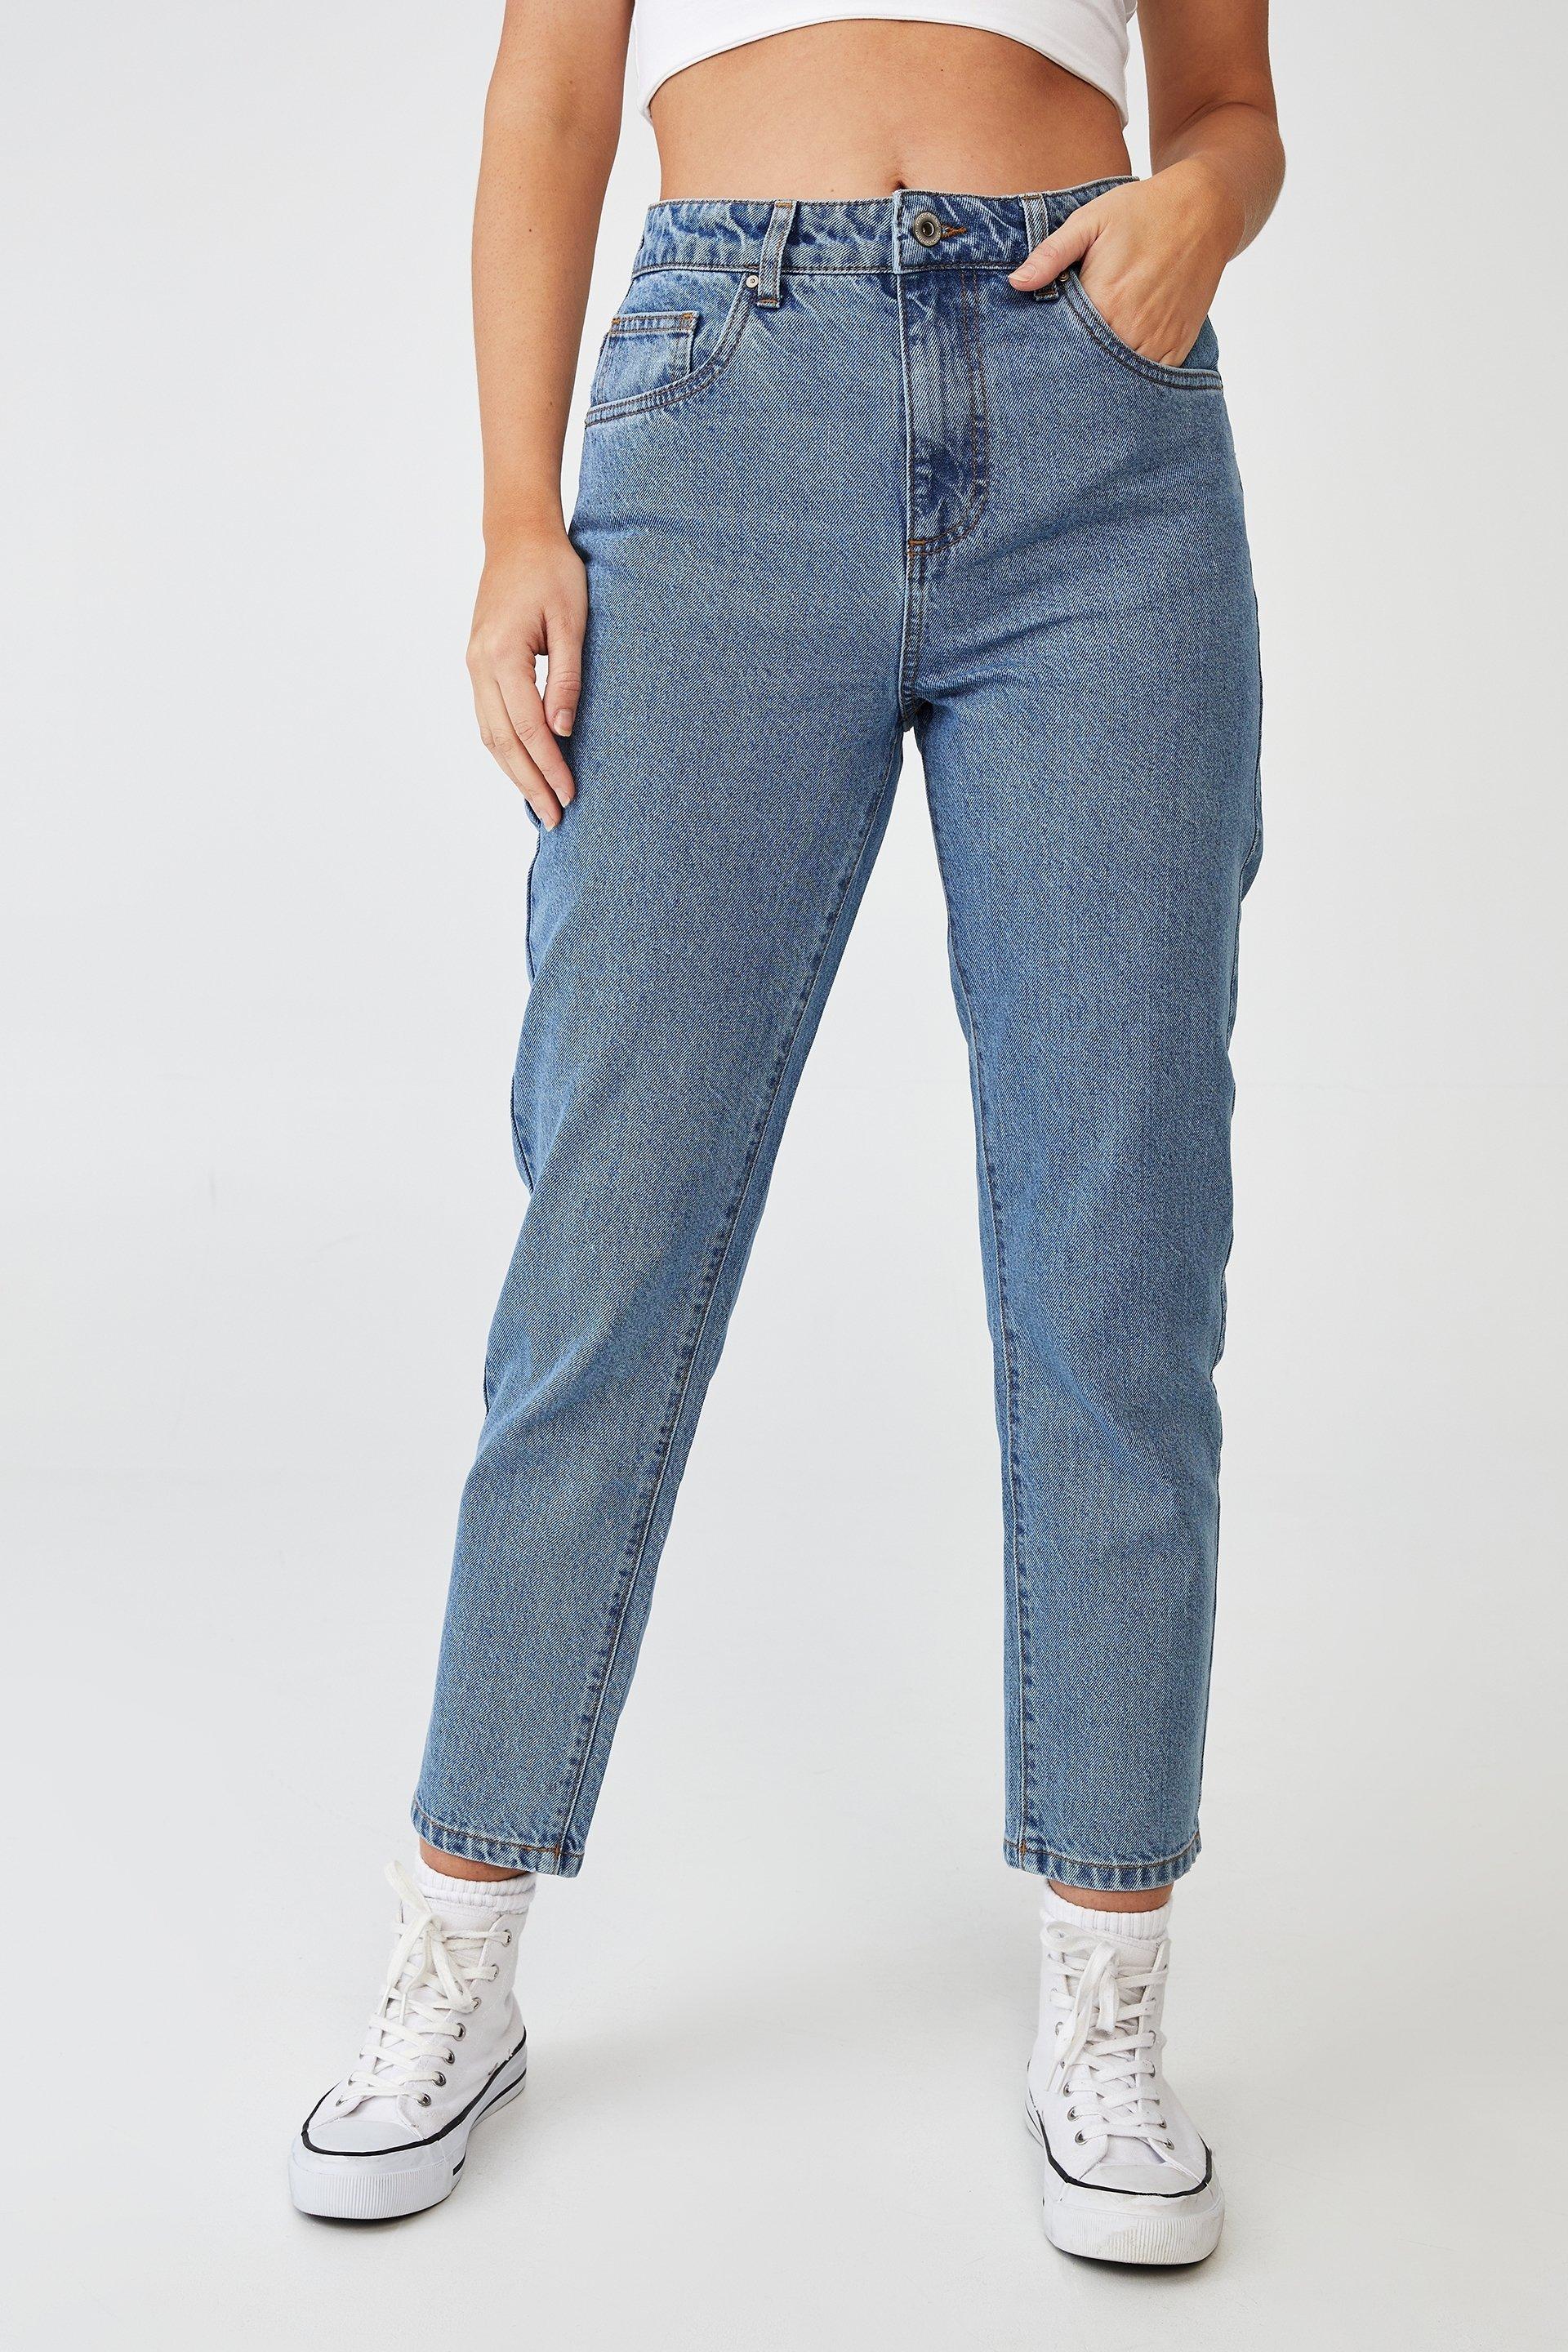 Mom jean - offshore blue Cotton On Jeans | Superbalist.com